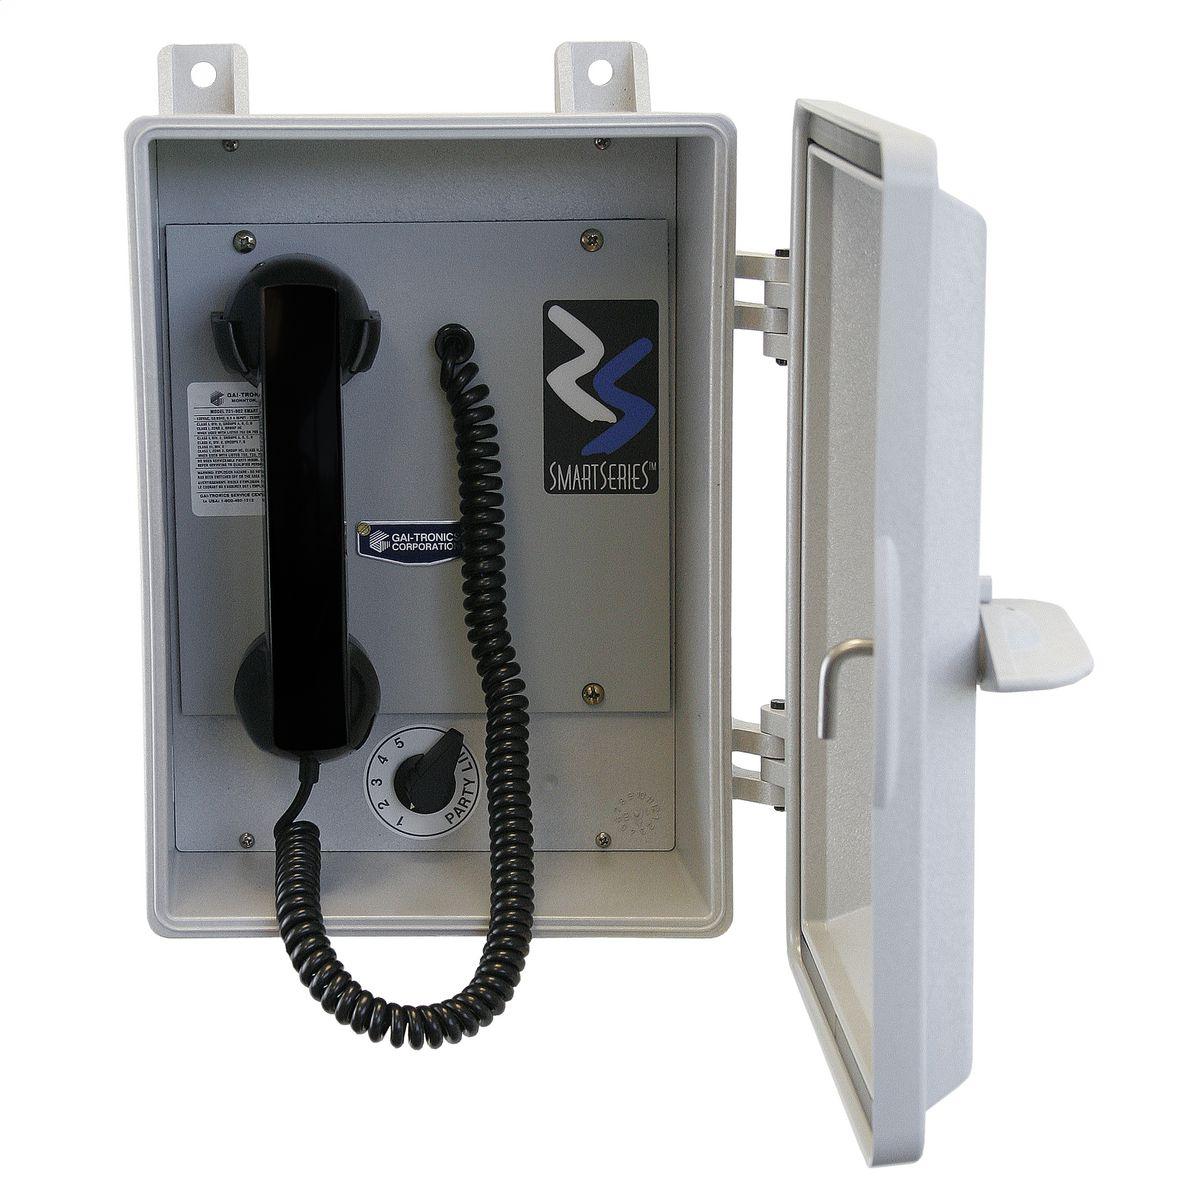 Hubbell 7305-822 Weatherproof Remote Terminal Unit (RTU), Multi-Party Line, NRTL Listed for USA and Canada Class I, Div. 2, Groups A, B, C, D; Consists of: 701-902 and 7335-005  ; Station off-hook status monitored ; Page and off-hook duration limited to prevent nuisance p